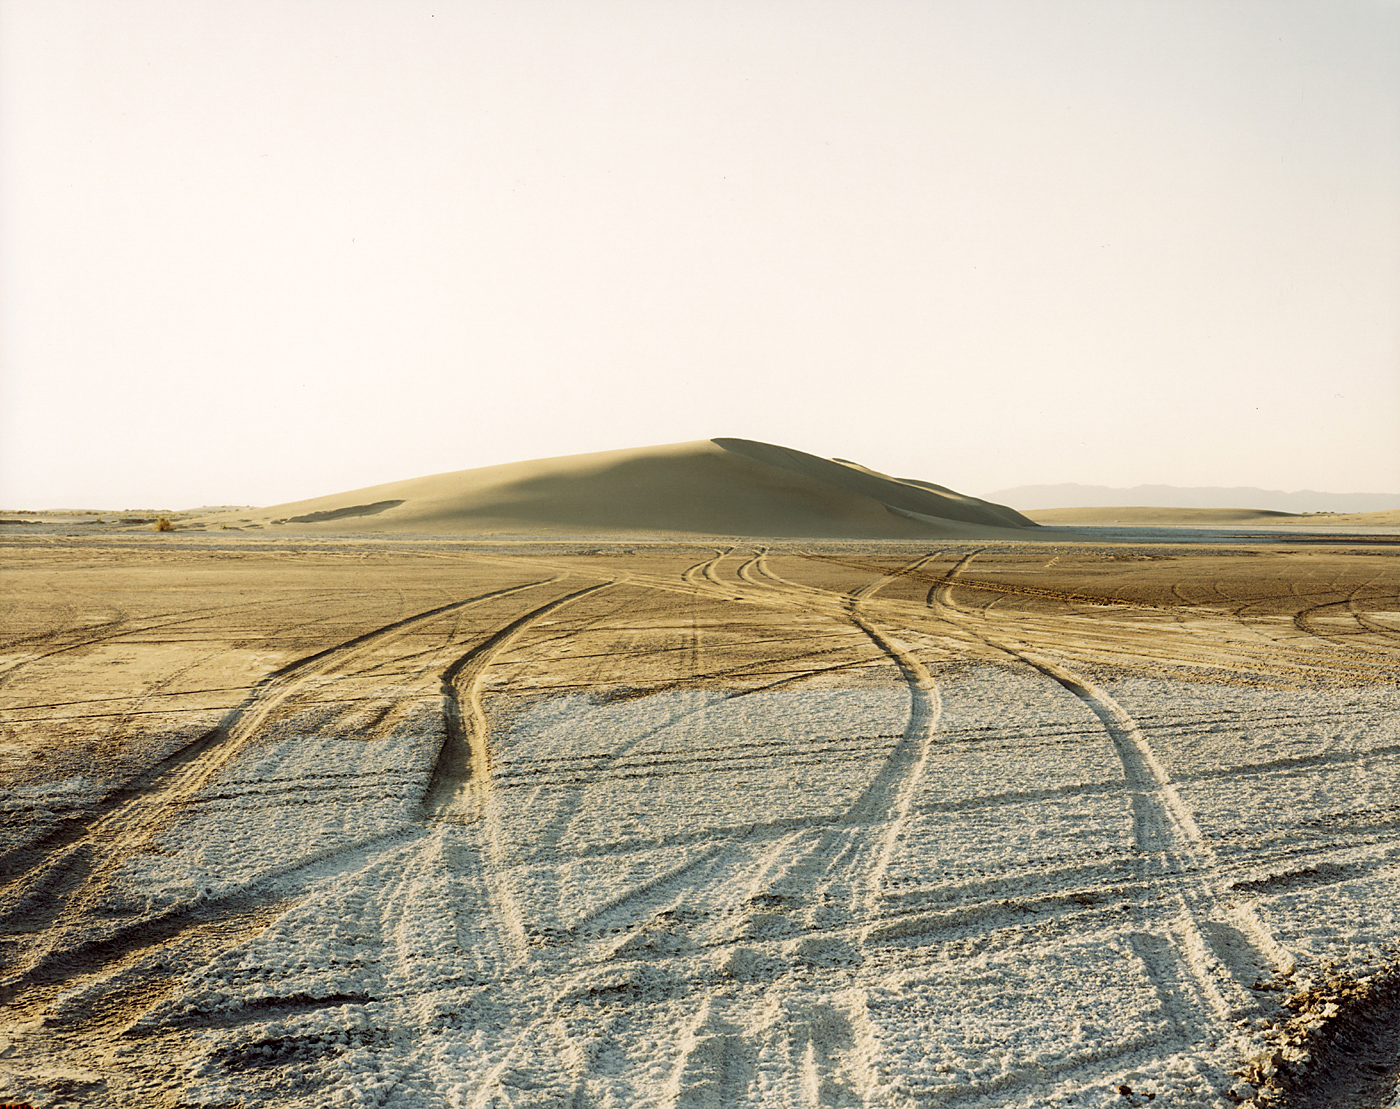 Color photograph of car tracks on desert ground with a sand hill on the horizon